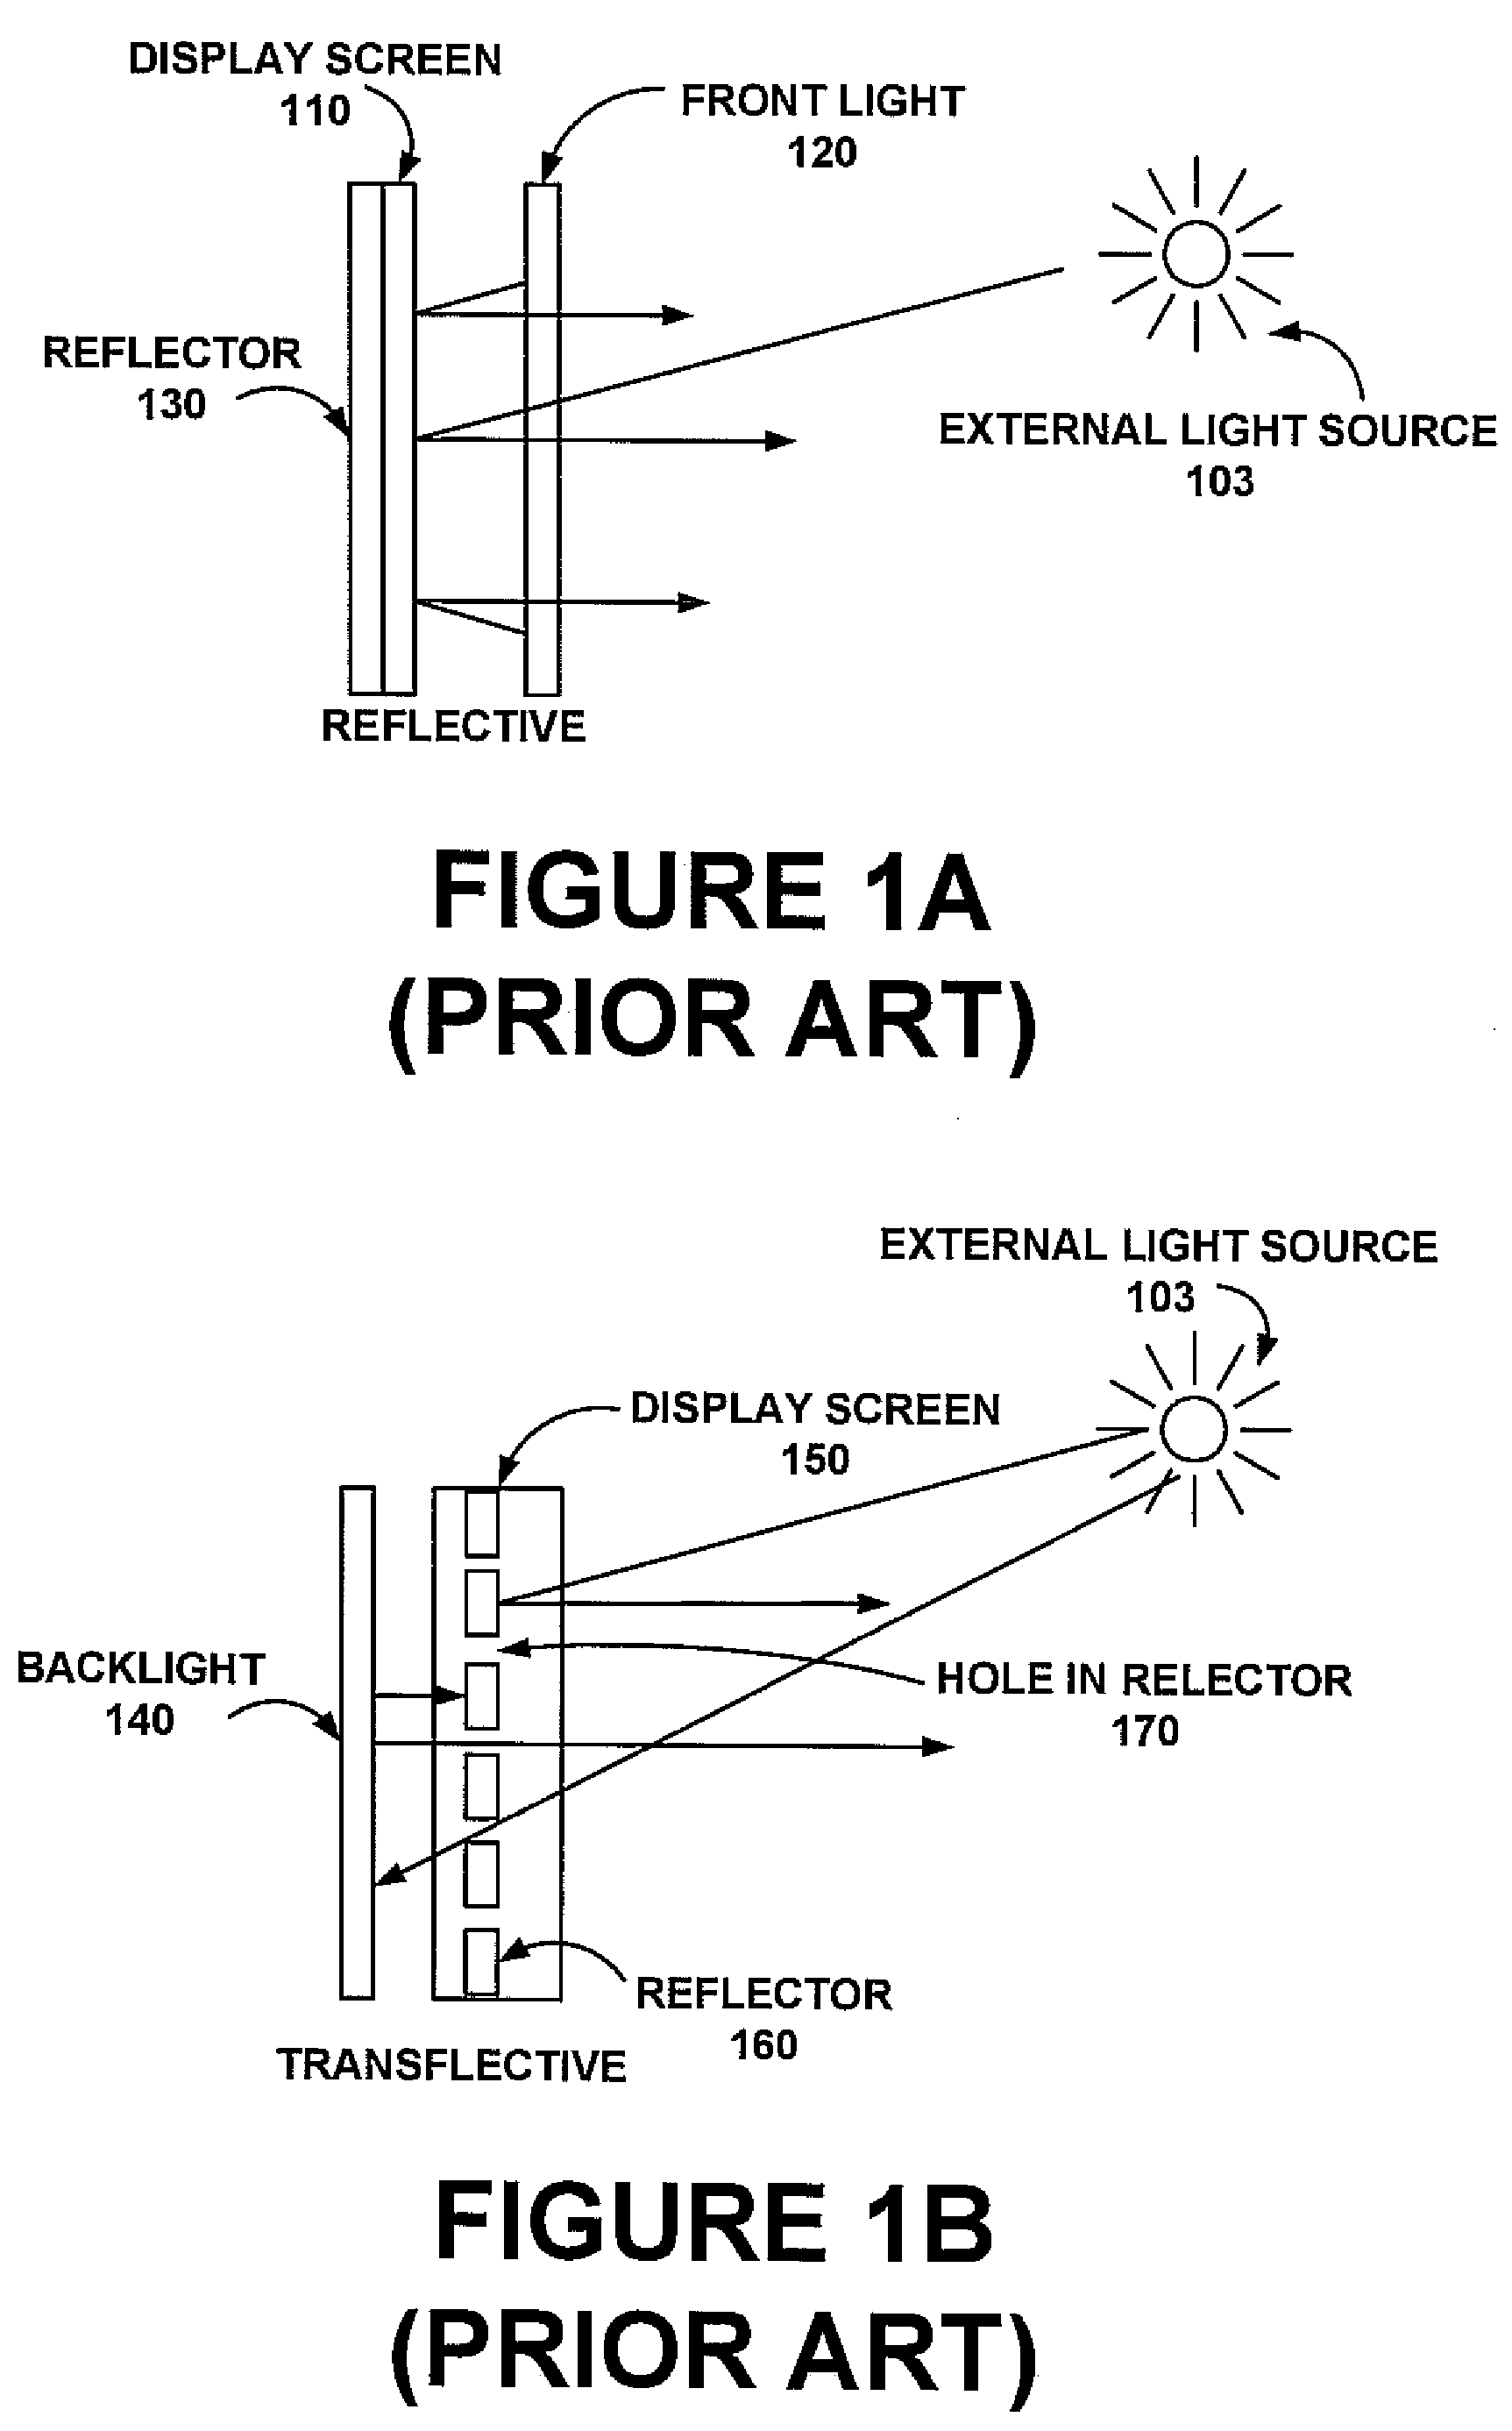 Dynamic brightness range for portable computer displays based on ambient conditions